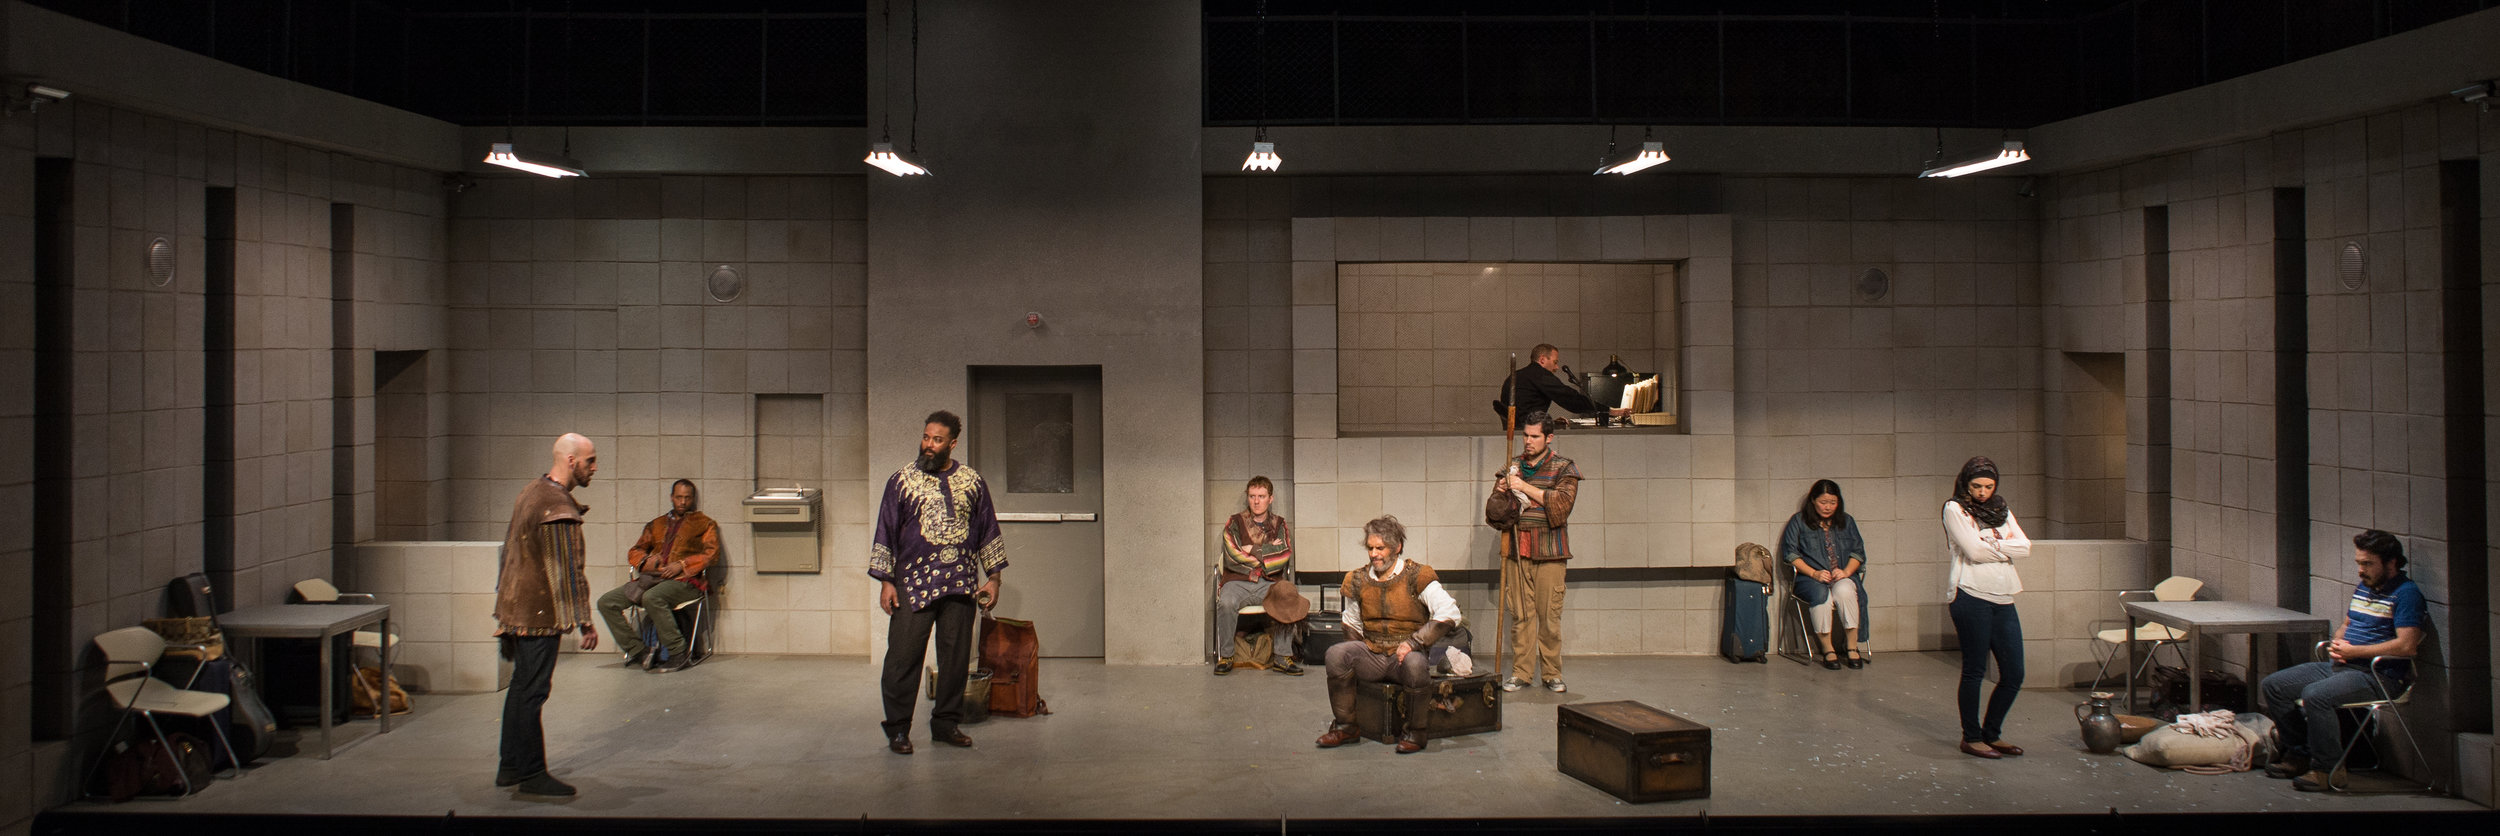 The cast of Man of La Mancha, Scenic Design by Michael Hoover, Photo by Allen Weeks